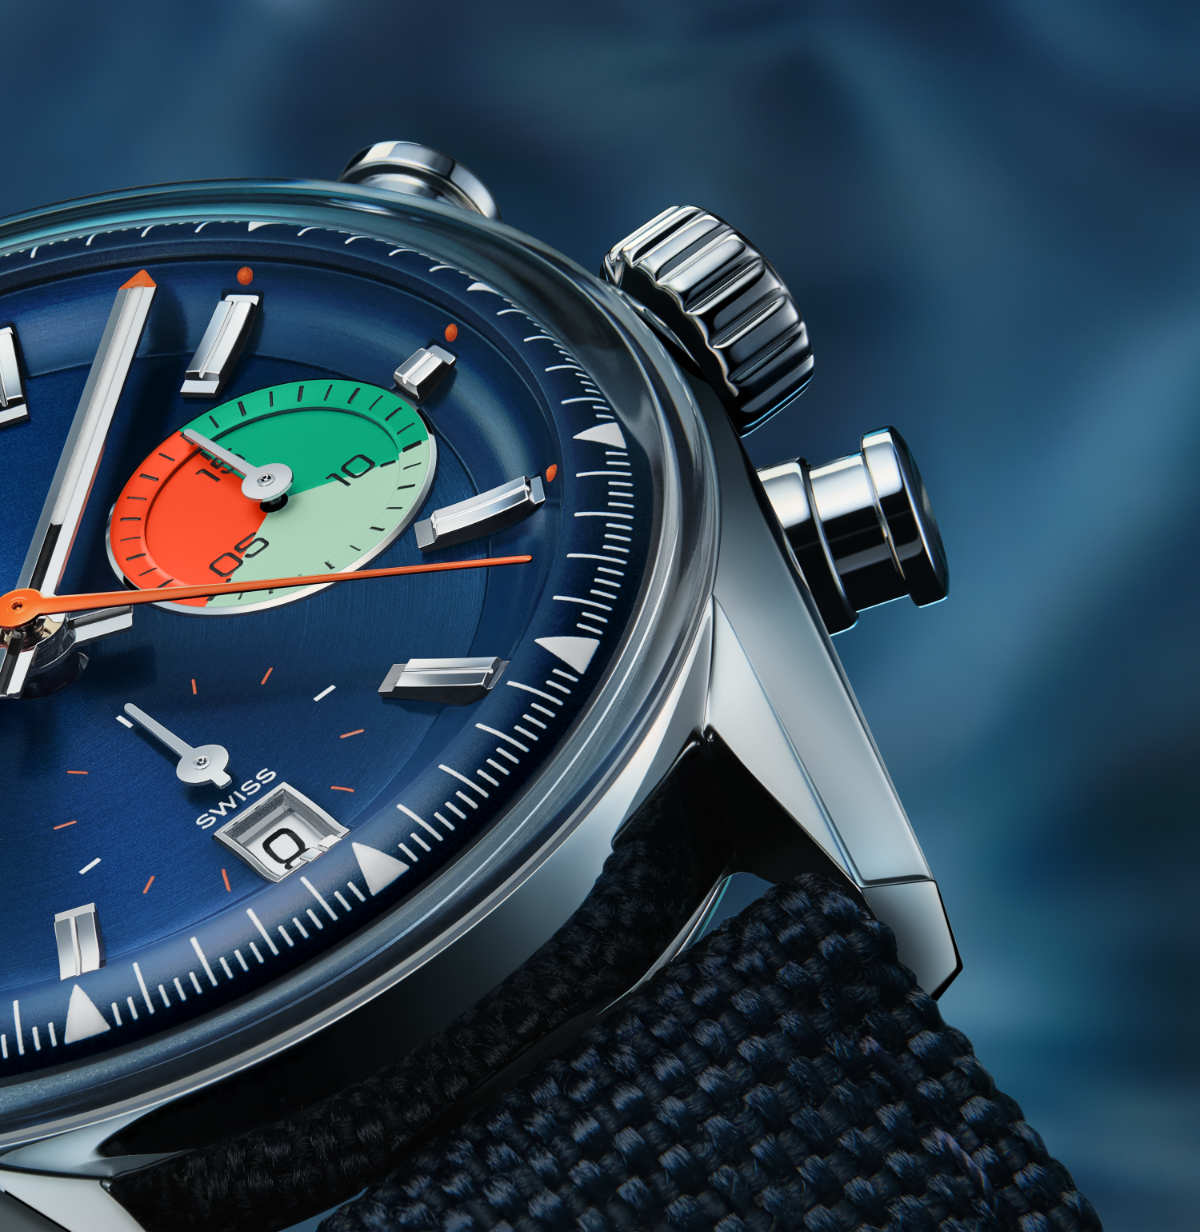 All-New Version Of Classic Sailing Watch Marks Tag Heuer’s Return To The High Seas